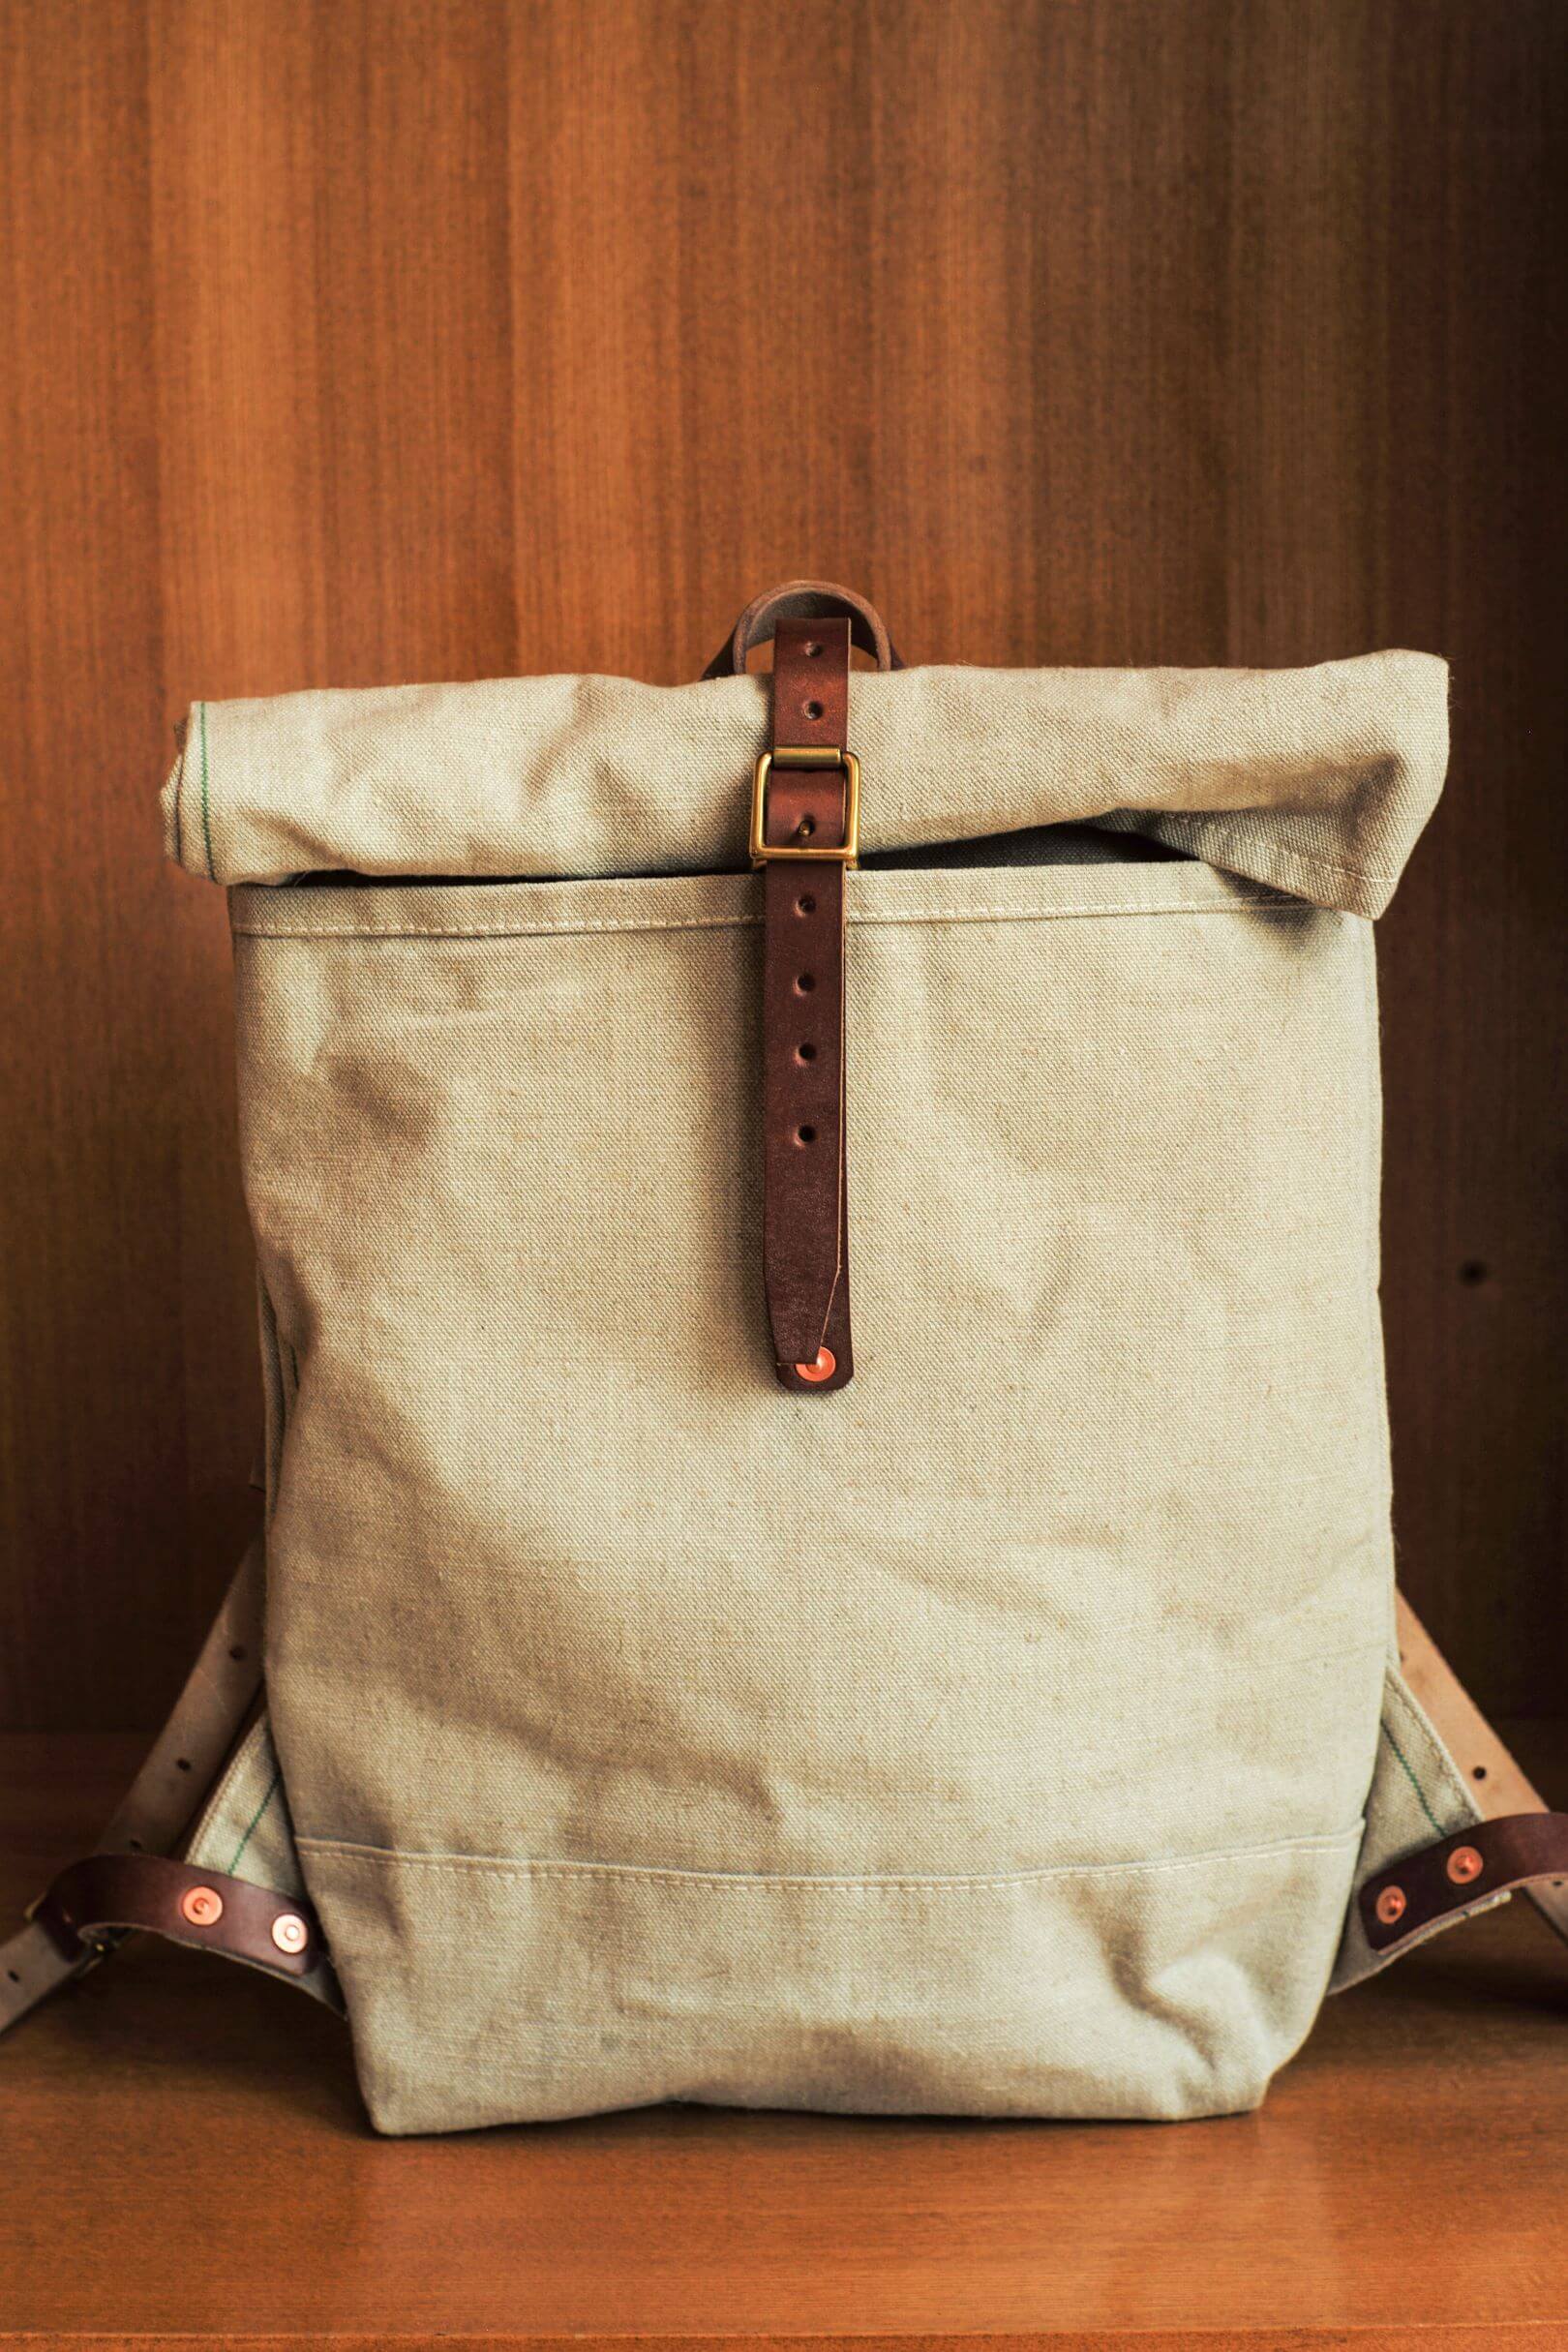 ROLLTOP RUCKSACK MILITARY FLAX